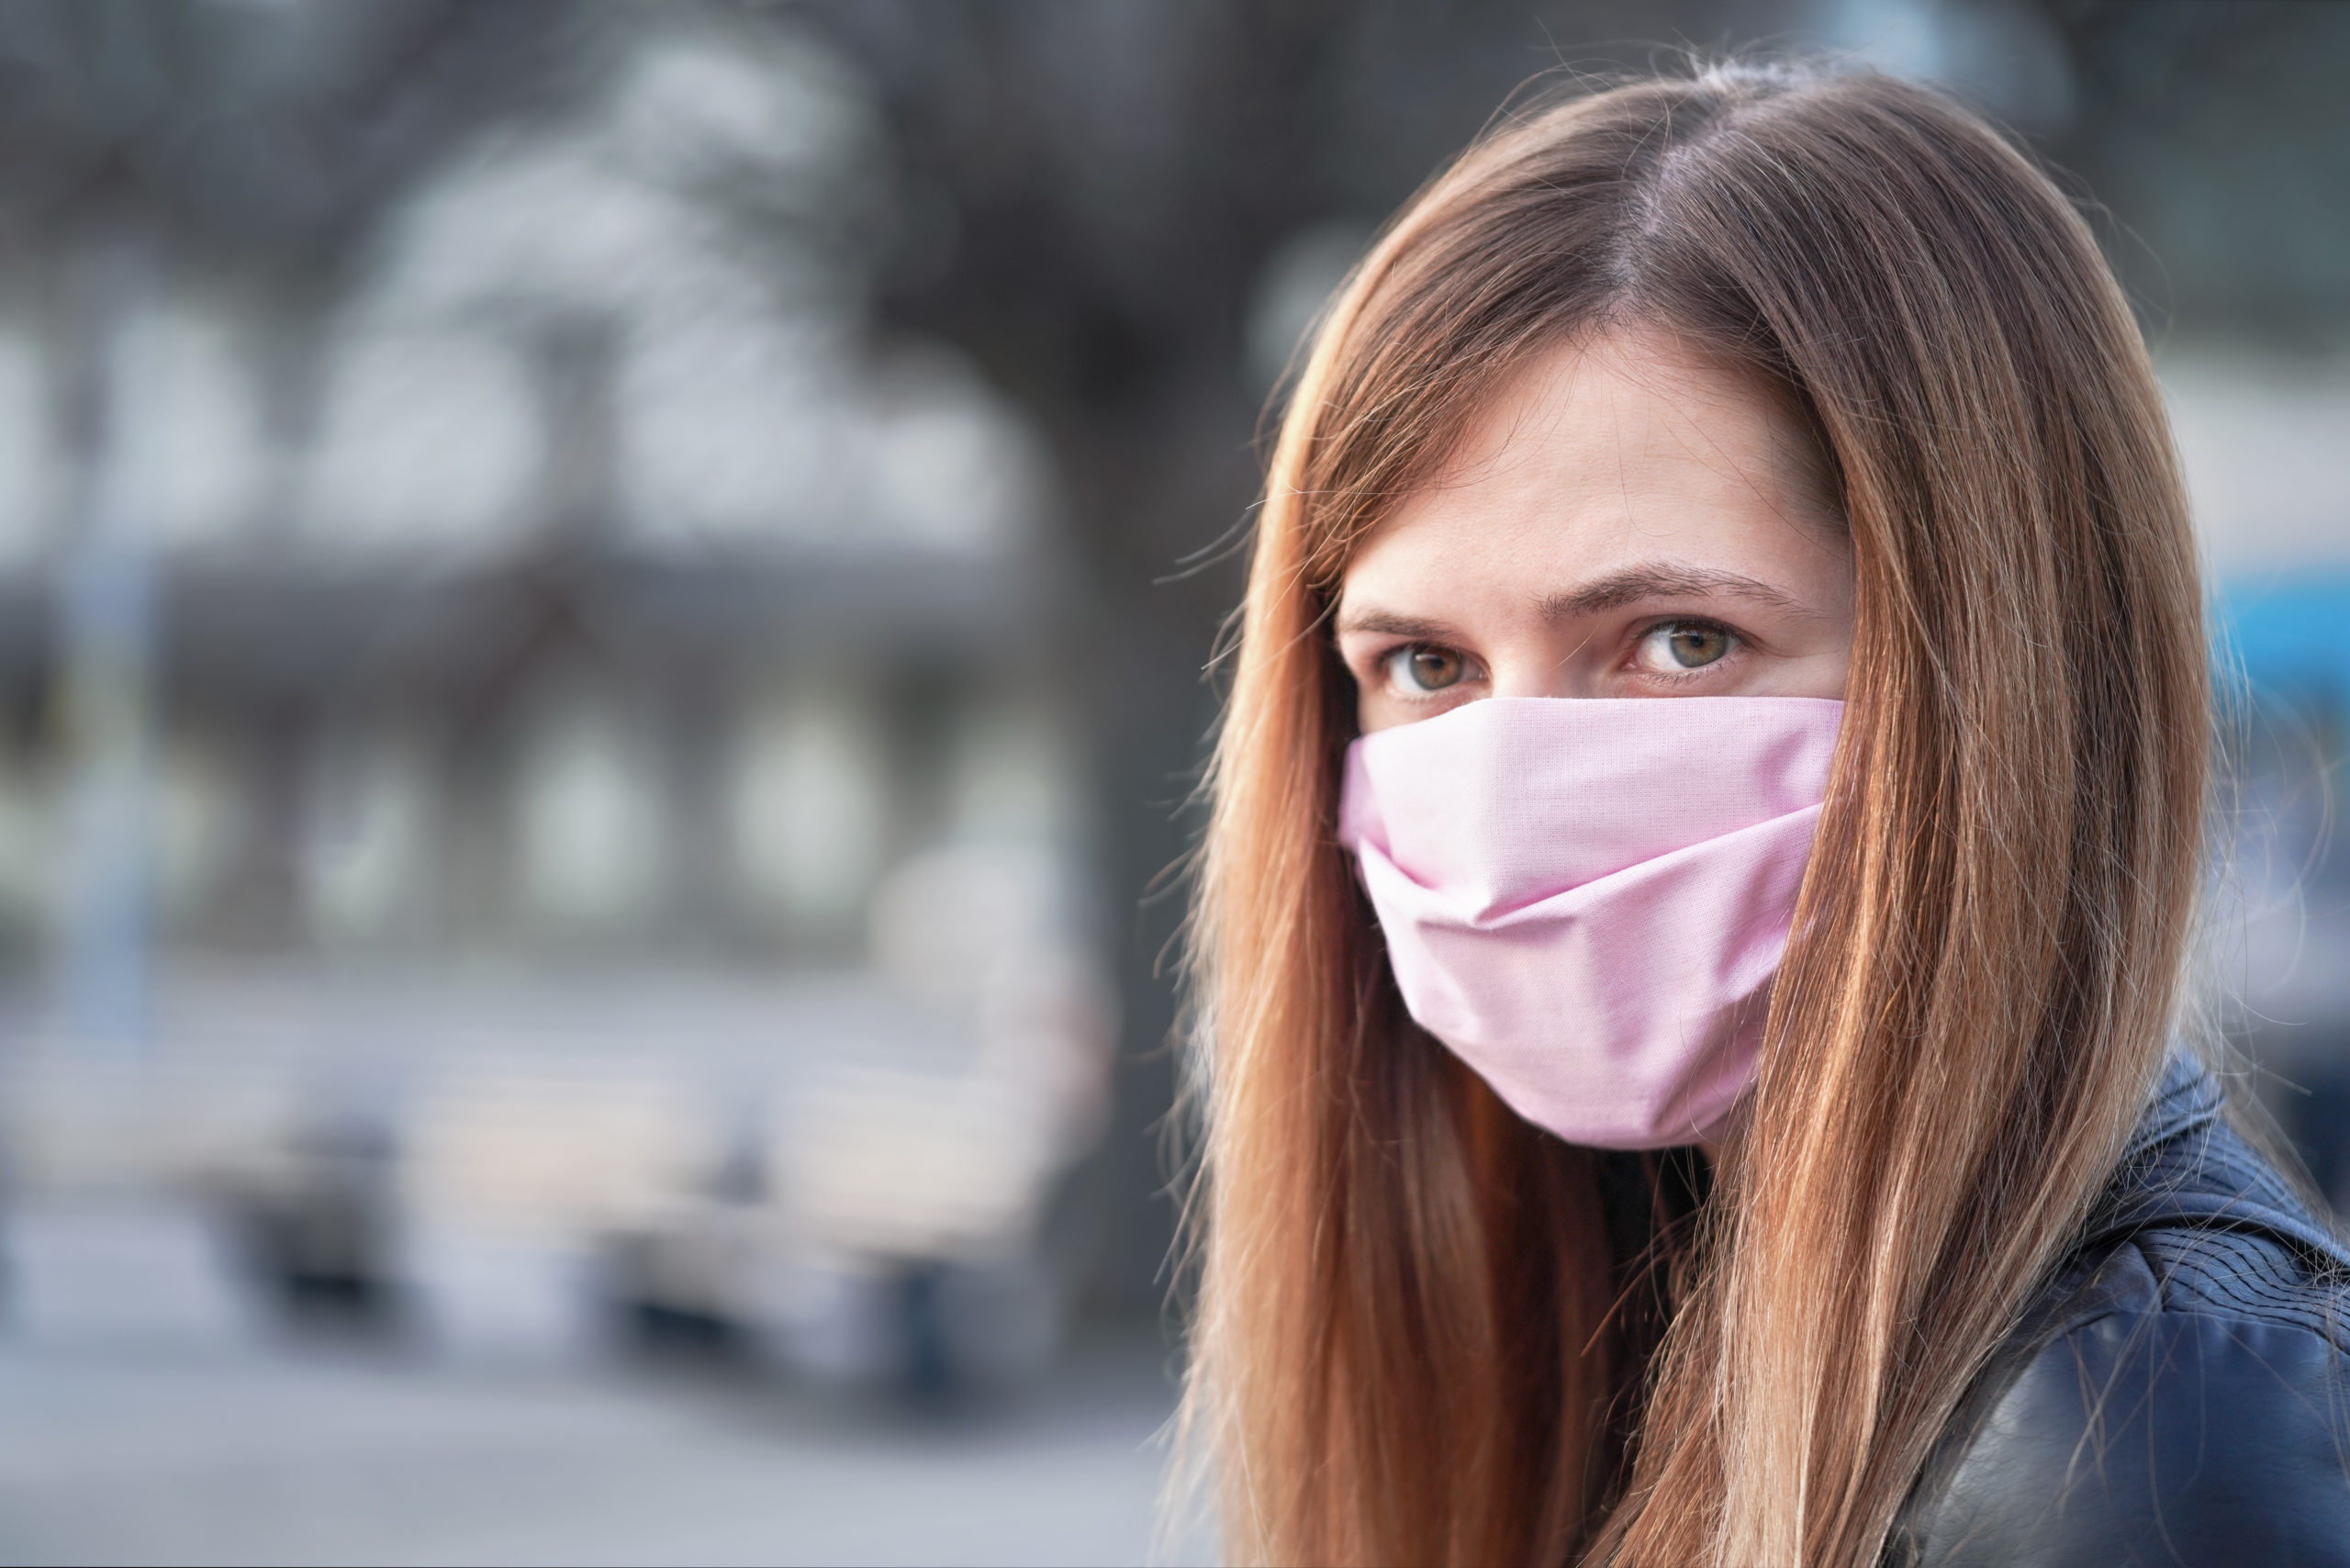 Young woman with hand made face nose mouth mask portrait, blurred empty city square behind her. Can be used during coronavirus covid-19 outbreak prevention